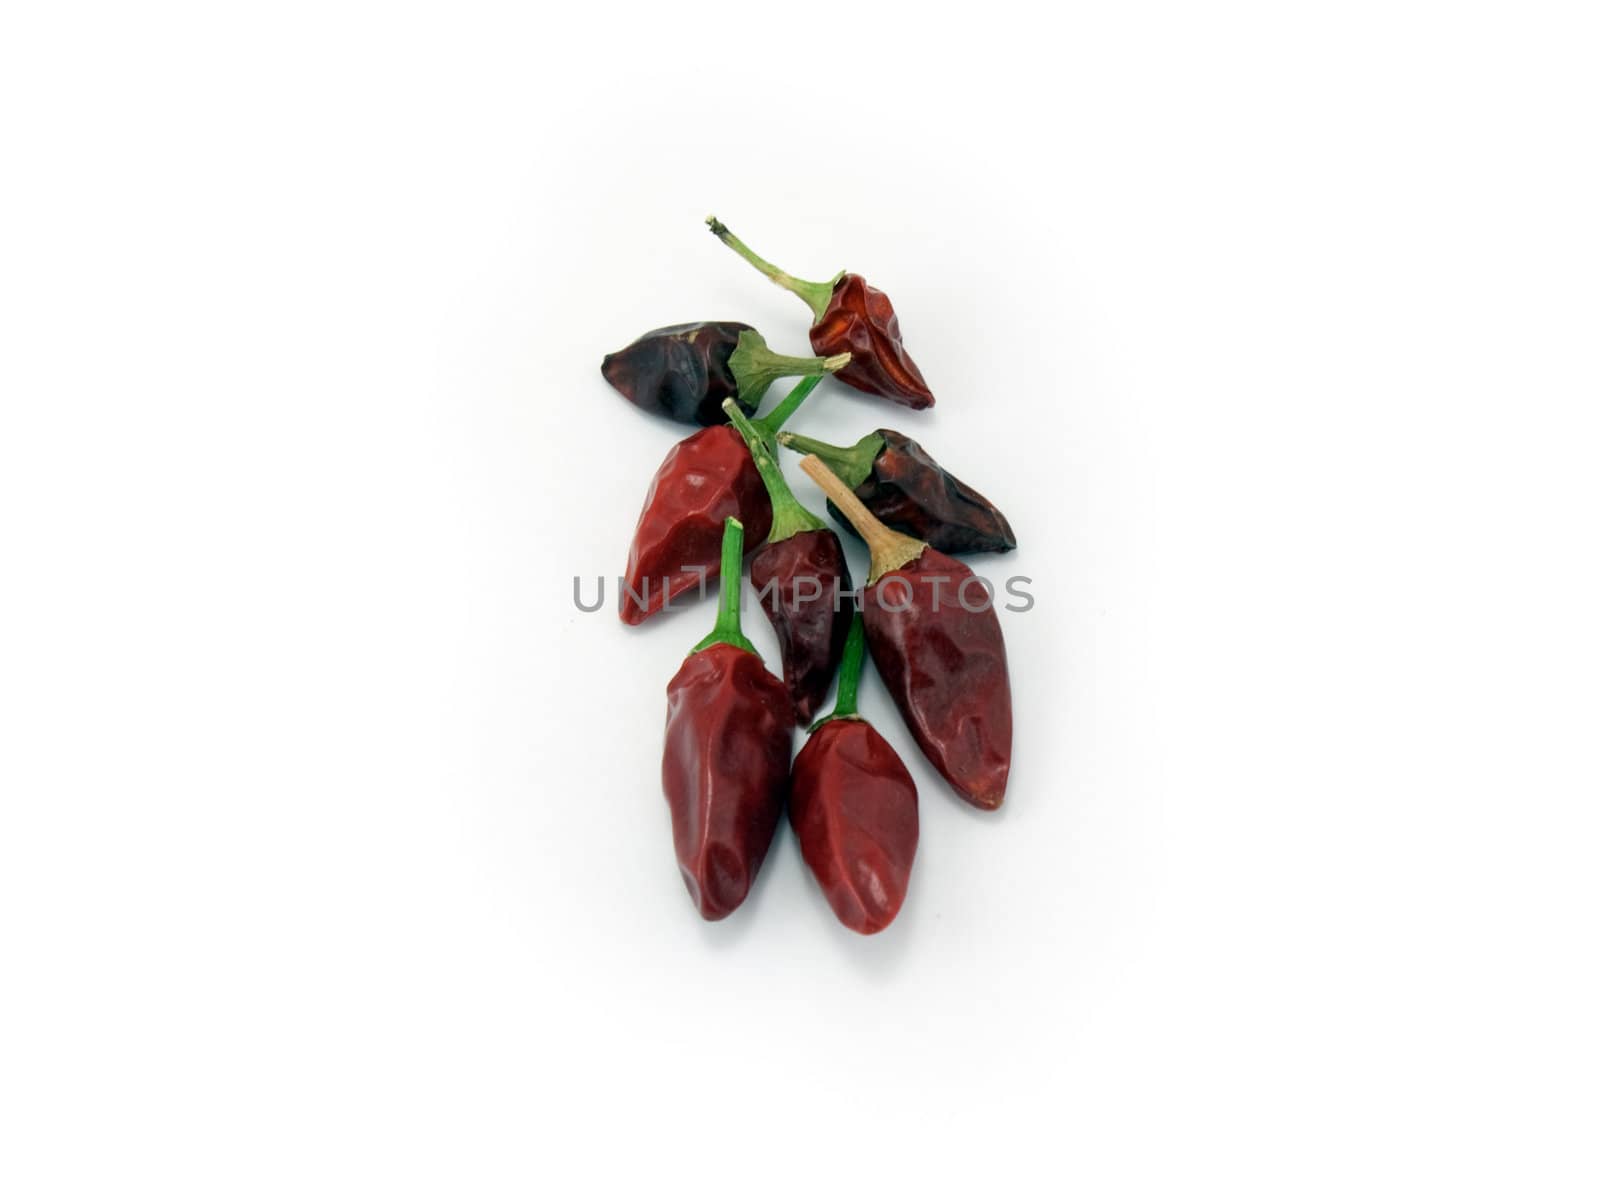 Chile pepper. In the pods on a white background